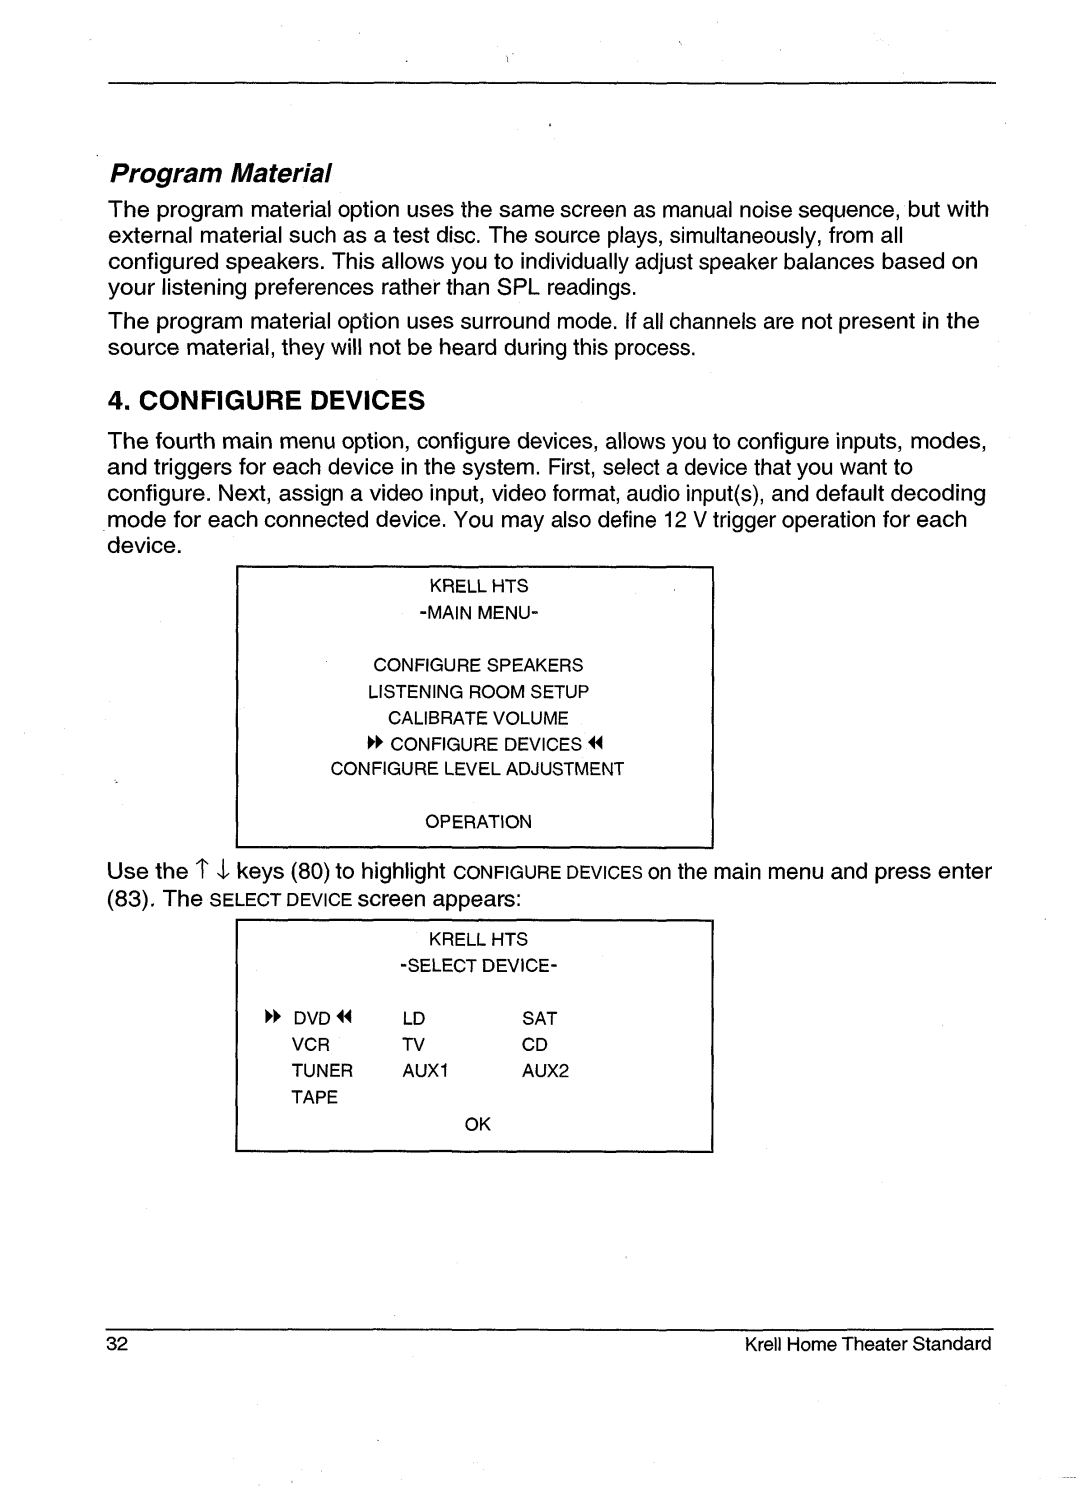 Krell Industries HTS 2 manual Program Material, Configure Devices 